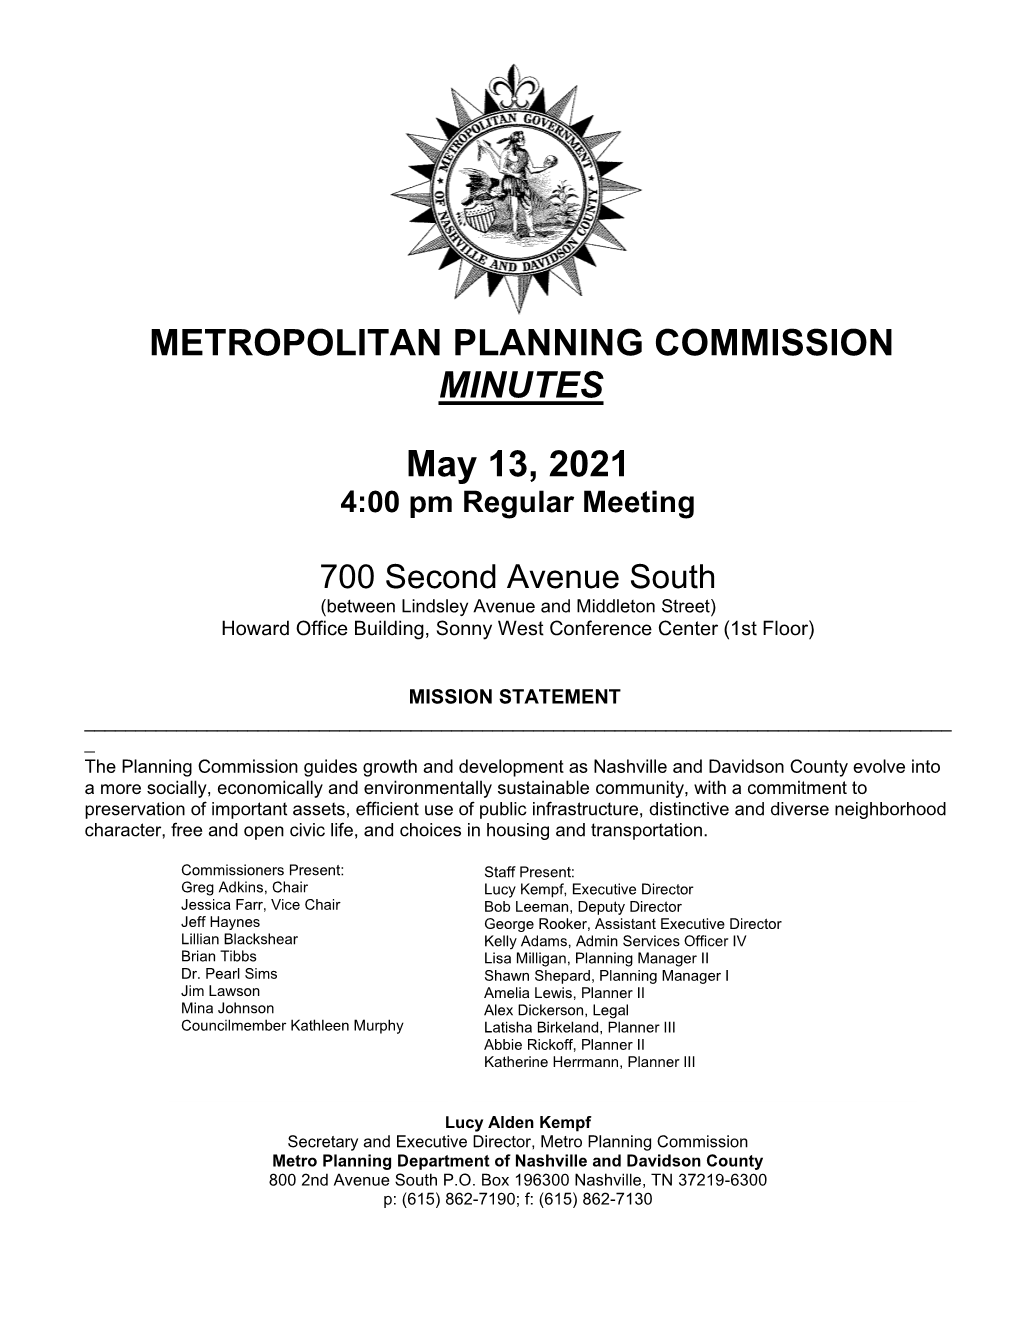 METROPOLITAN PLANNING COMMISSION MINUTES May 13